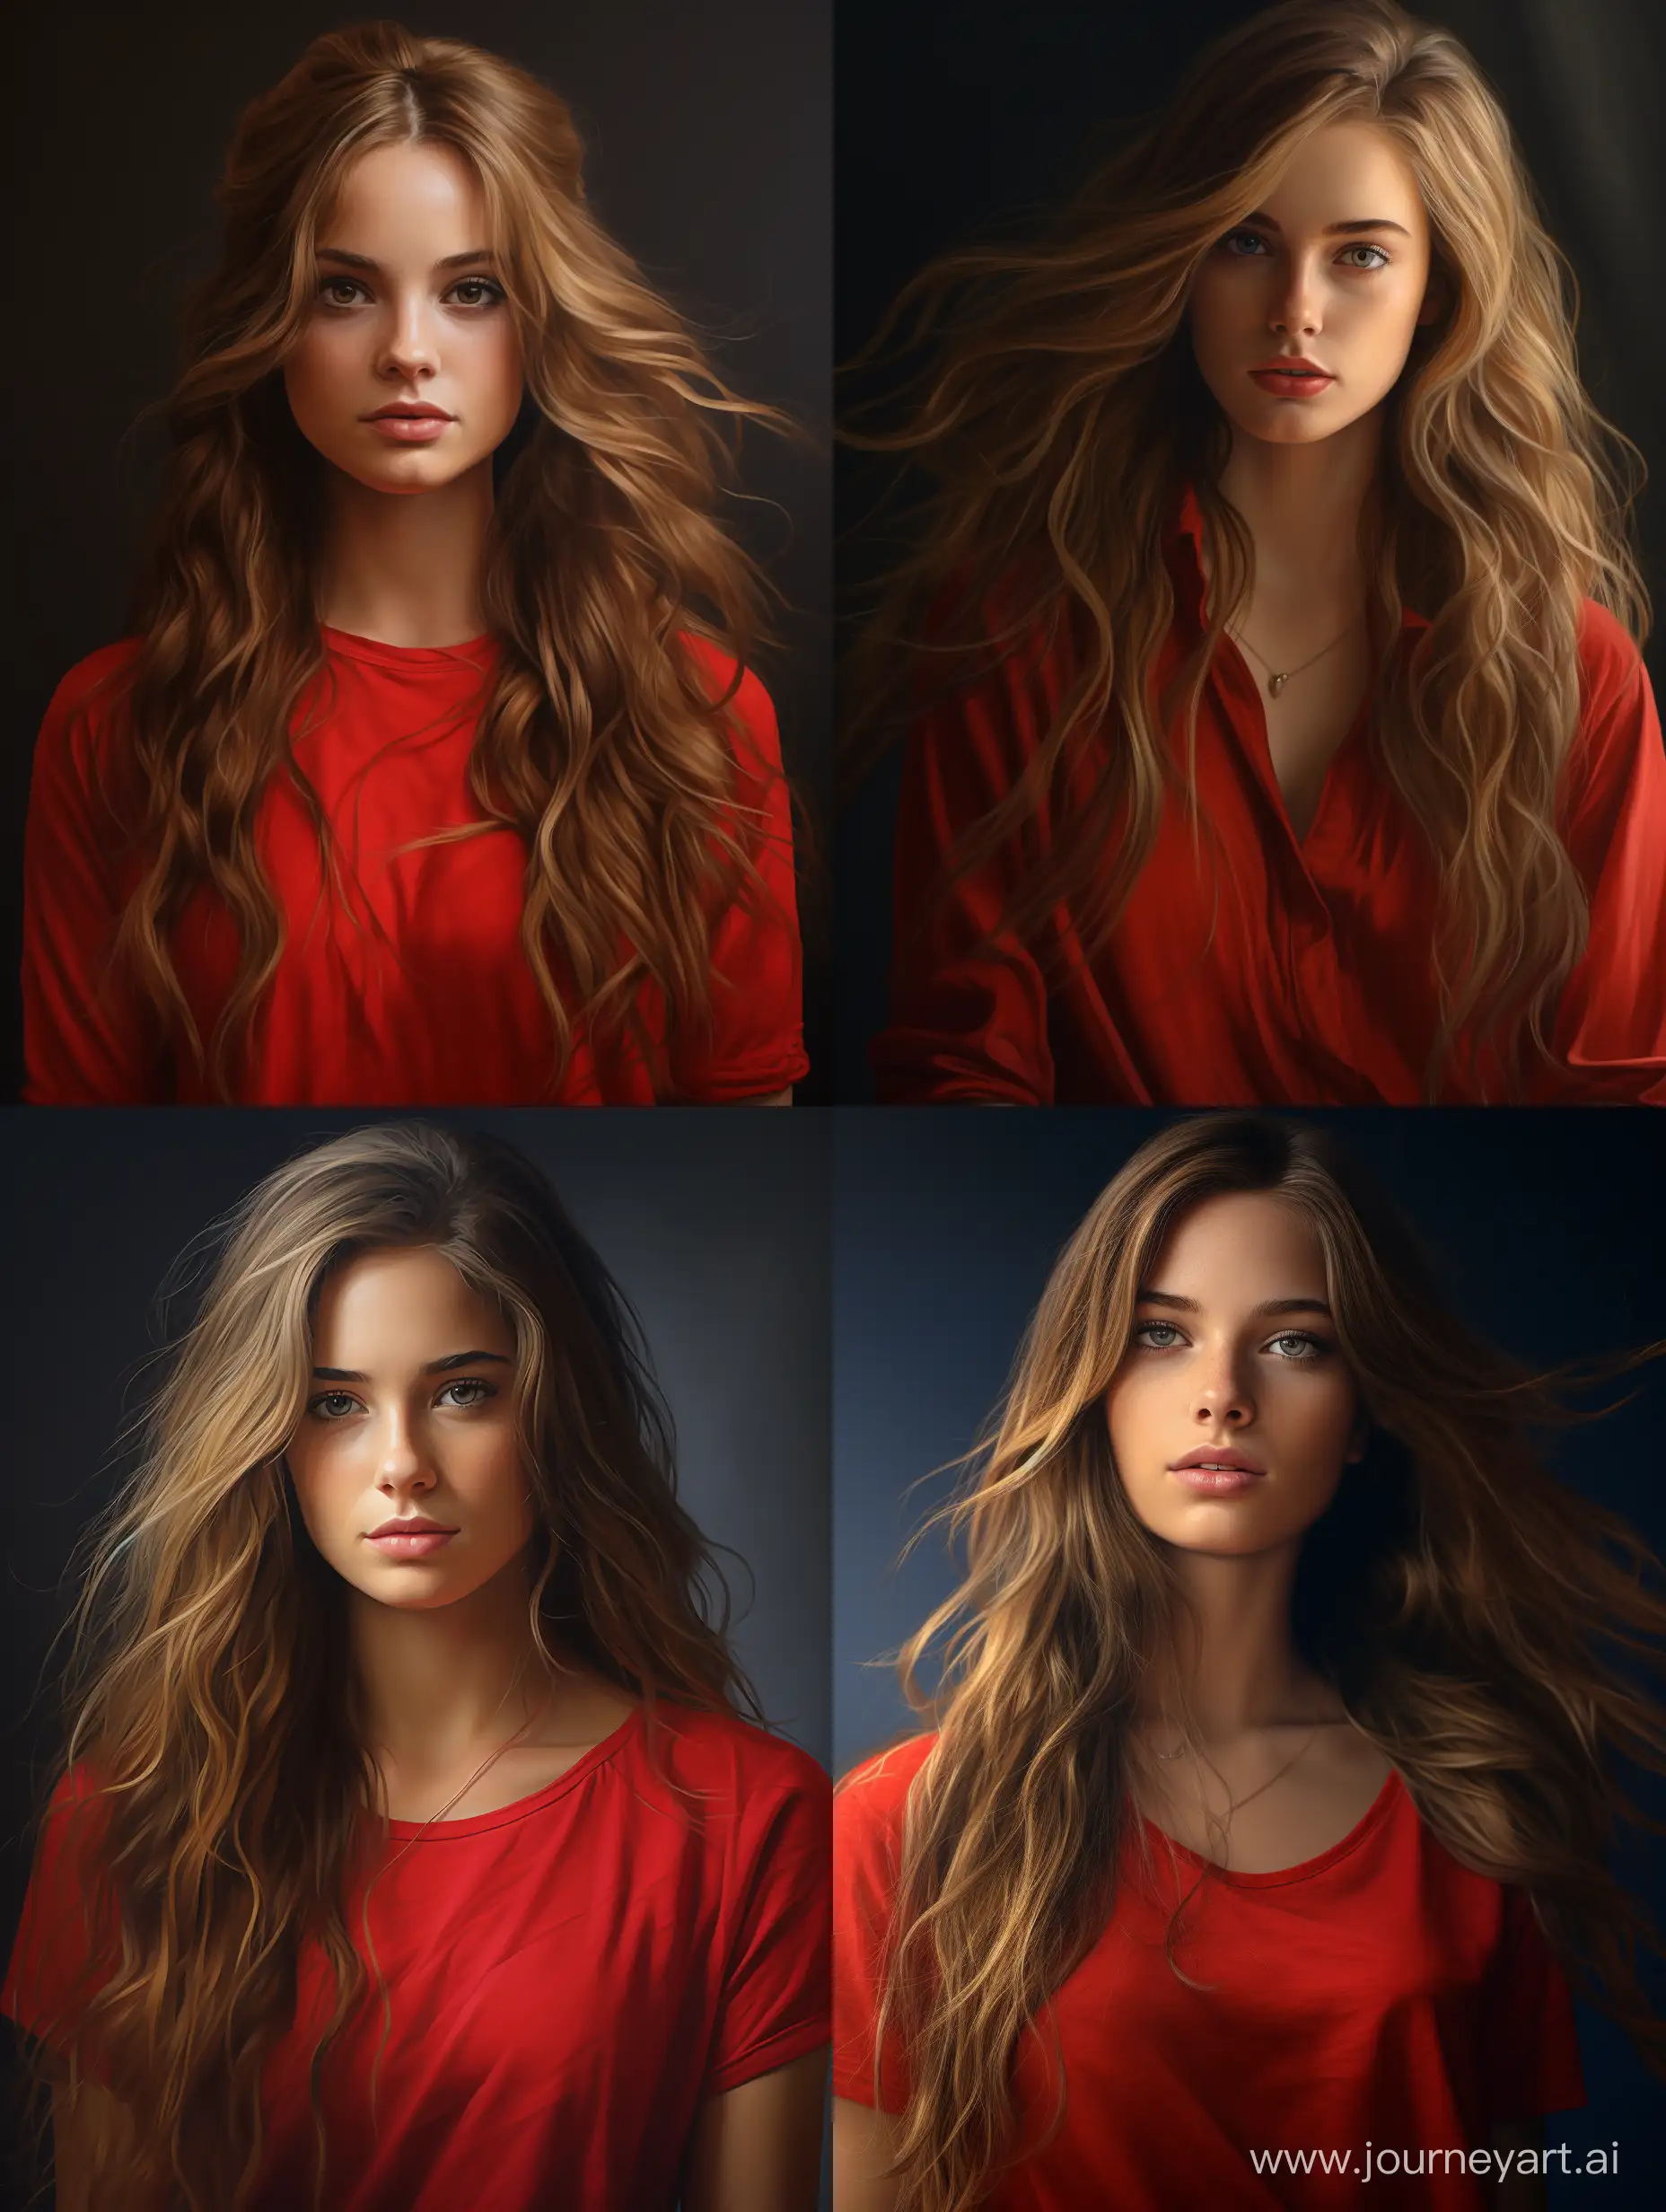 HyperRealistic-Portrait-of-a-20YearOld-Girl-in-Red-Shirt